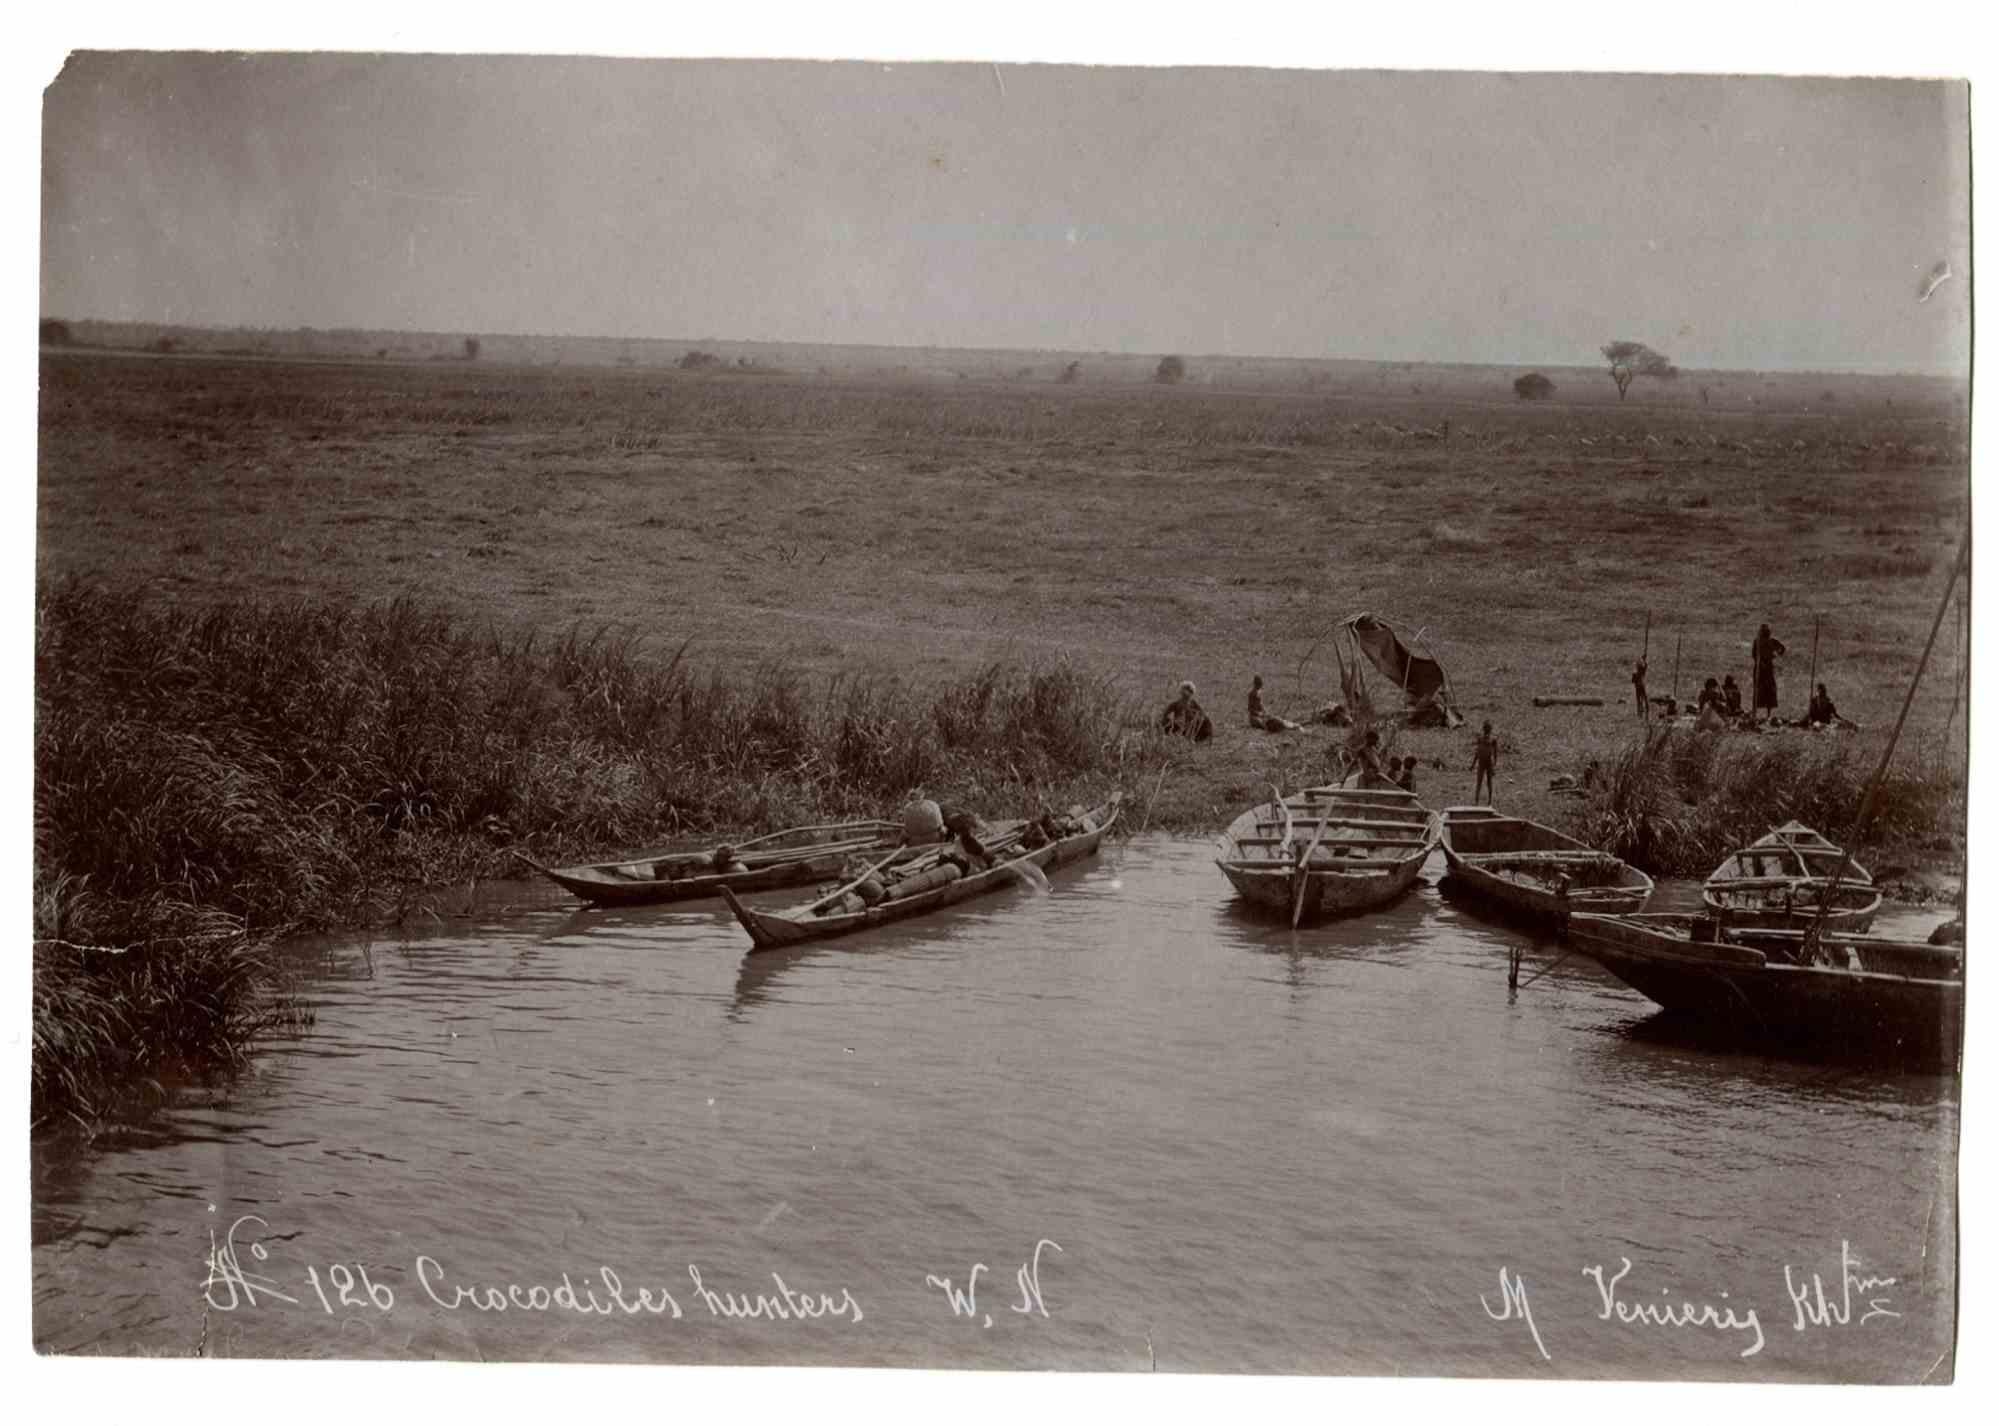 Unknown Portrait Photograph - Crocodile Hunters in Africa - Vintage Photo - Early 20th Century